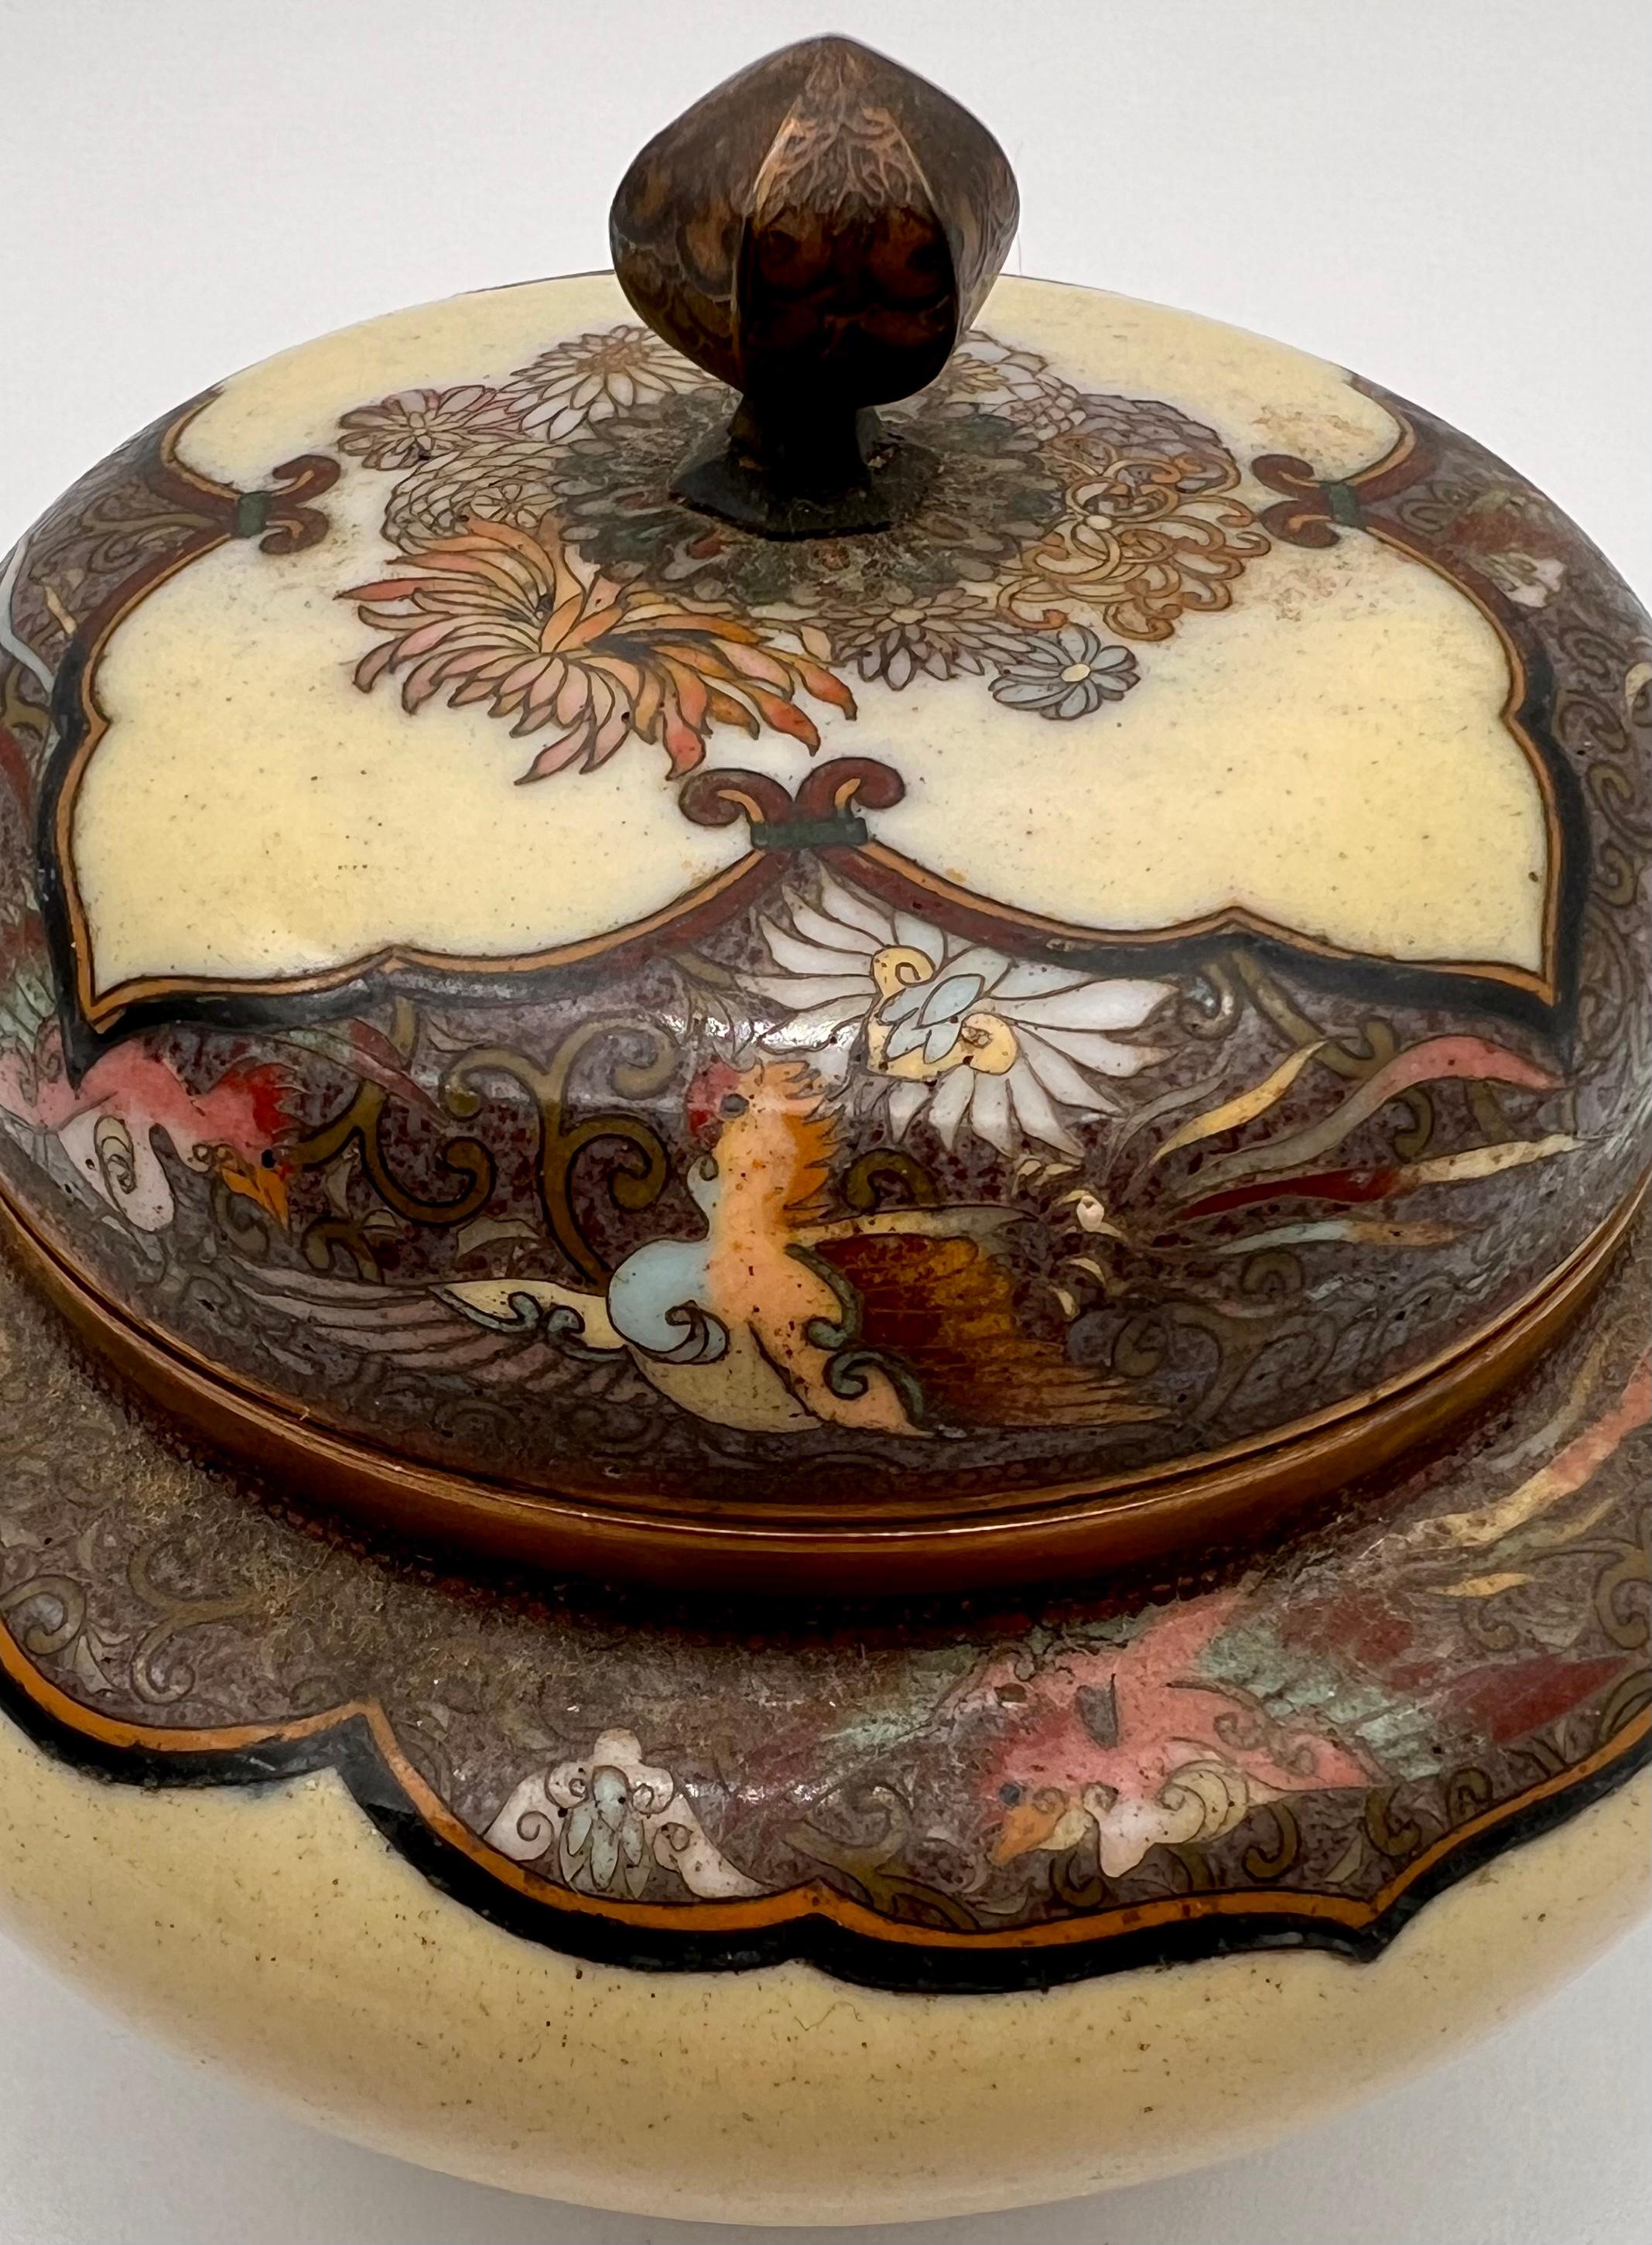 Exquisite Cloisonné Enamel Vase and Cover in the Manner of Namikawa Yasuyuki For Sale 11